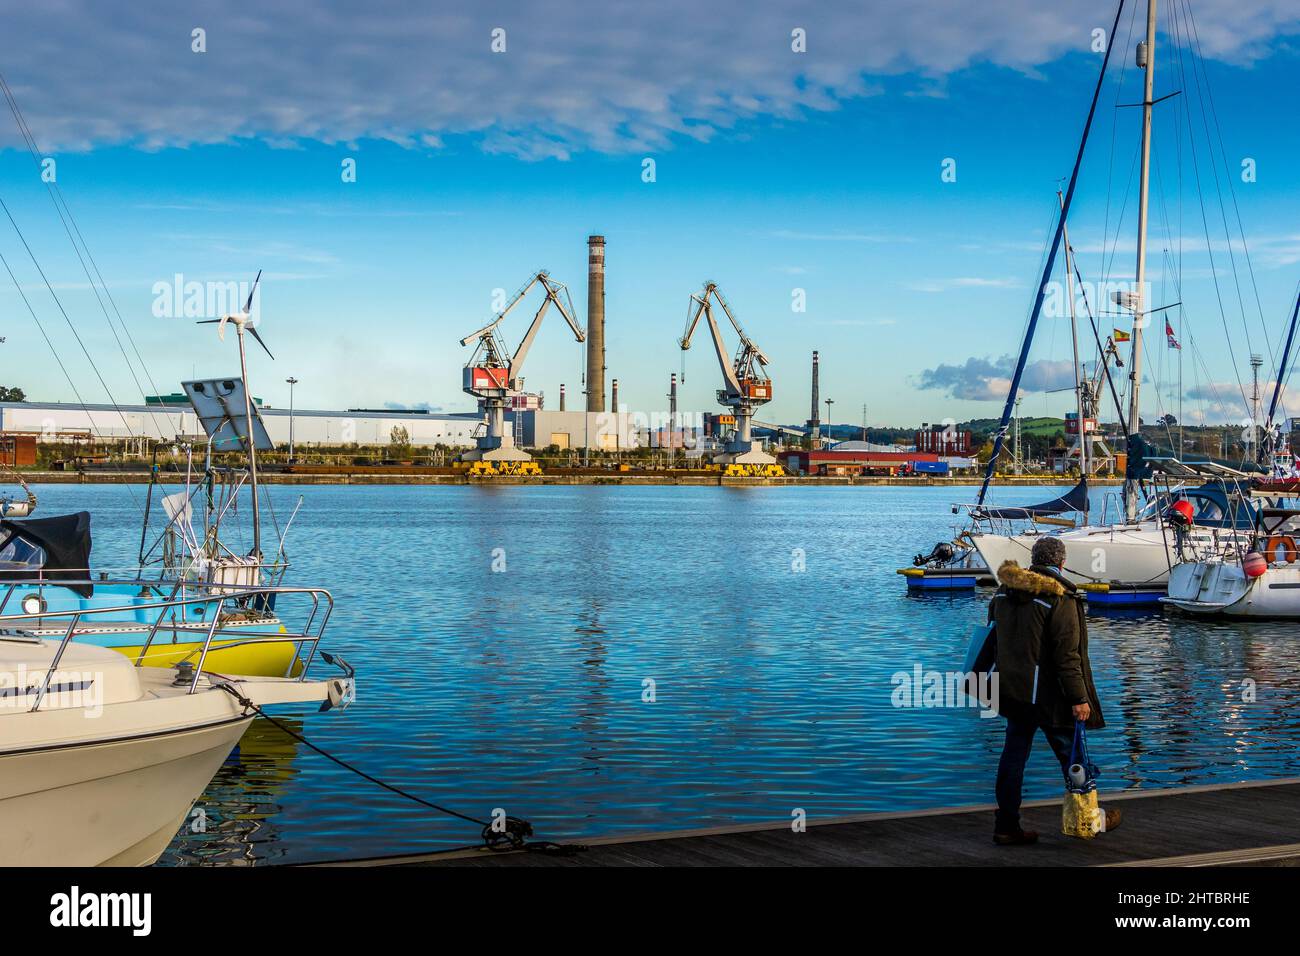 Closeup of a Harbor in the city of Aviles, Asturias, Spain Stock Photo